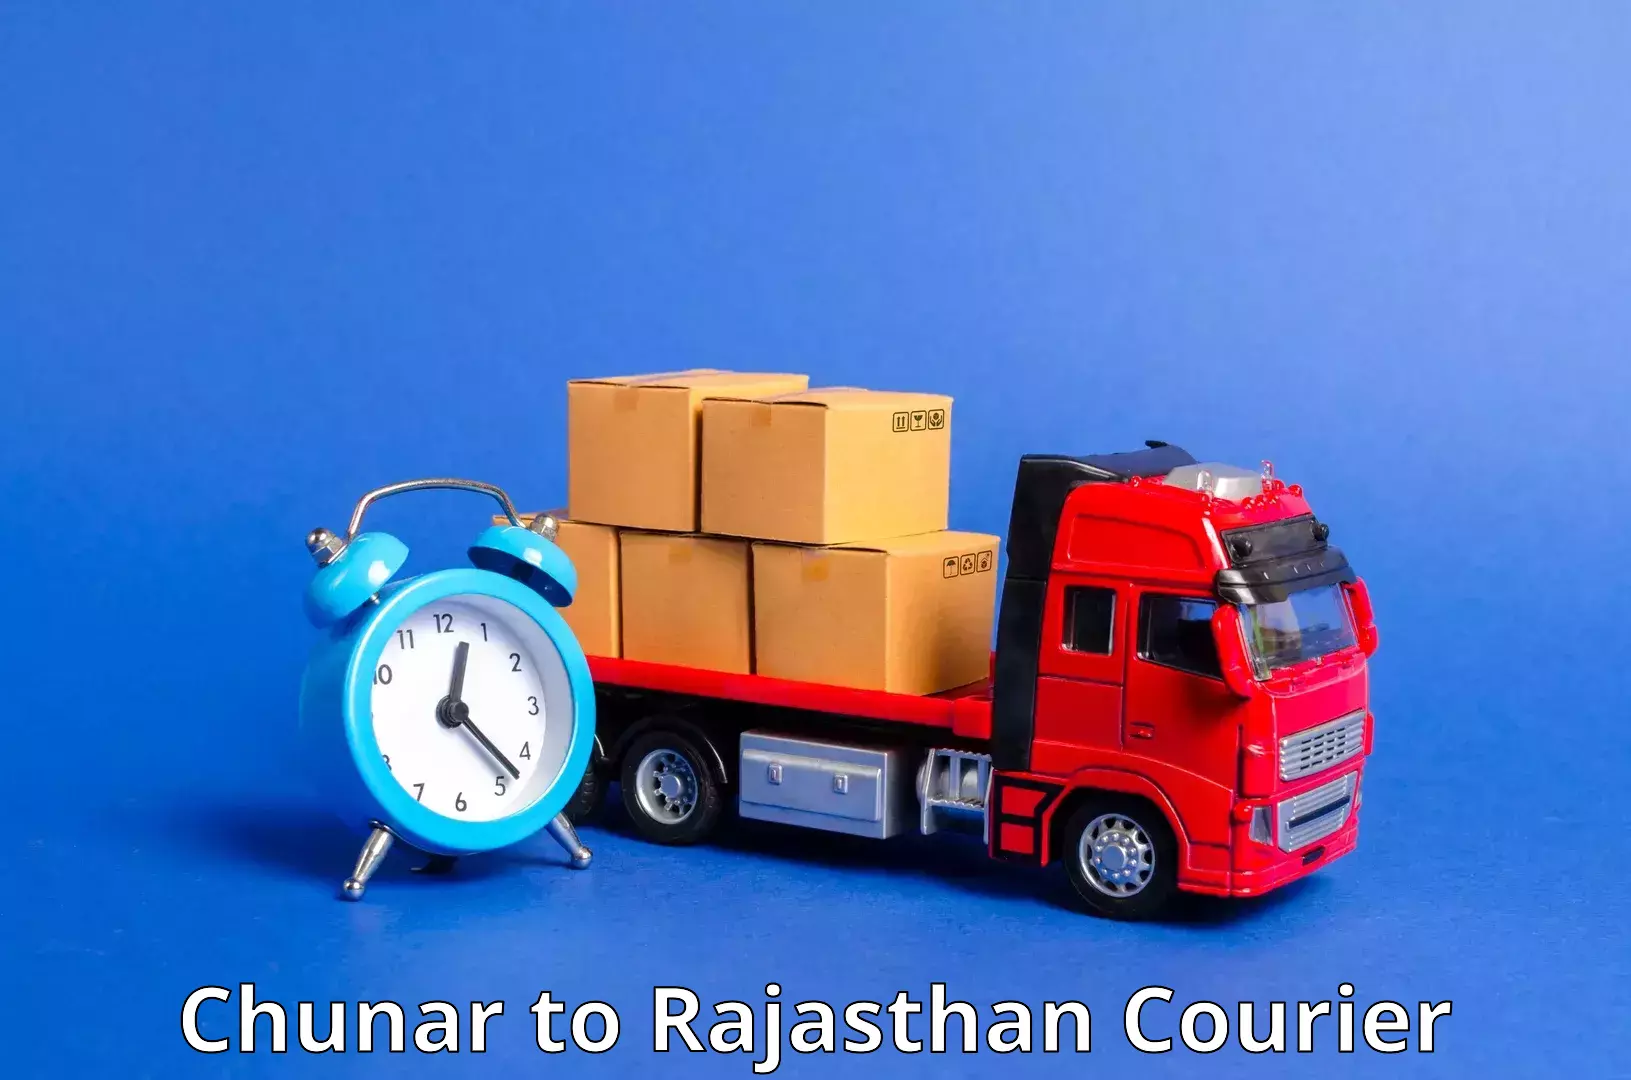 Reliable delivery network Chunar to Merta